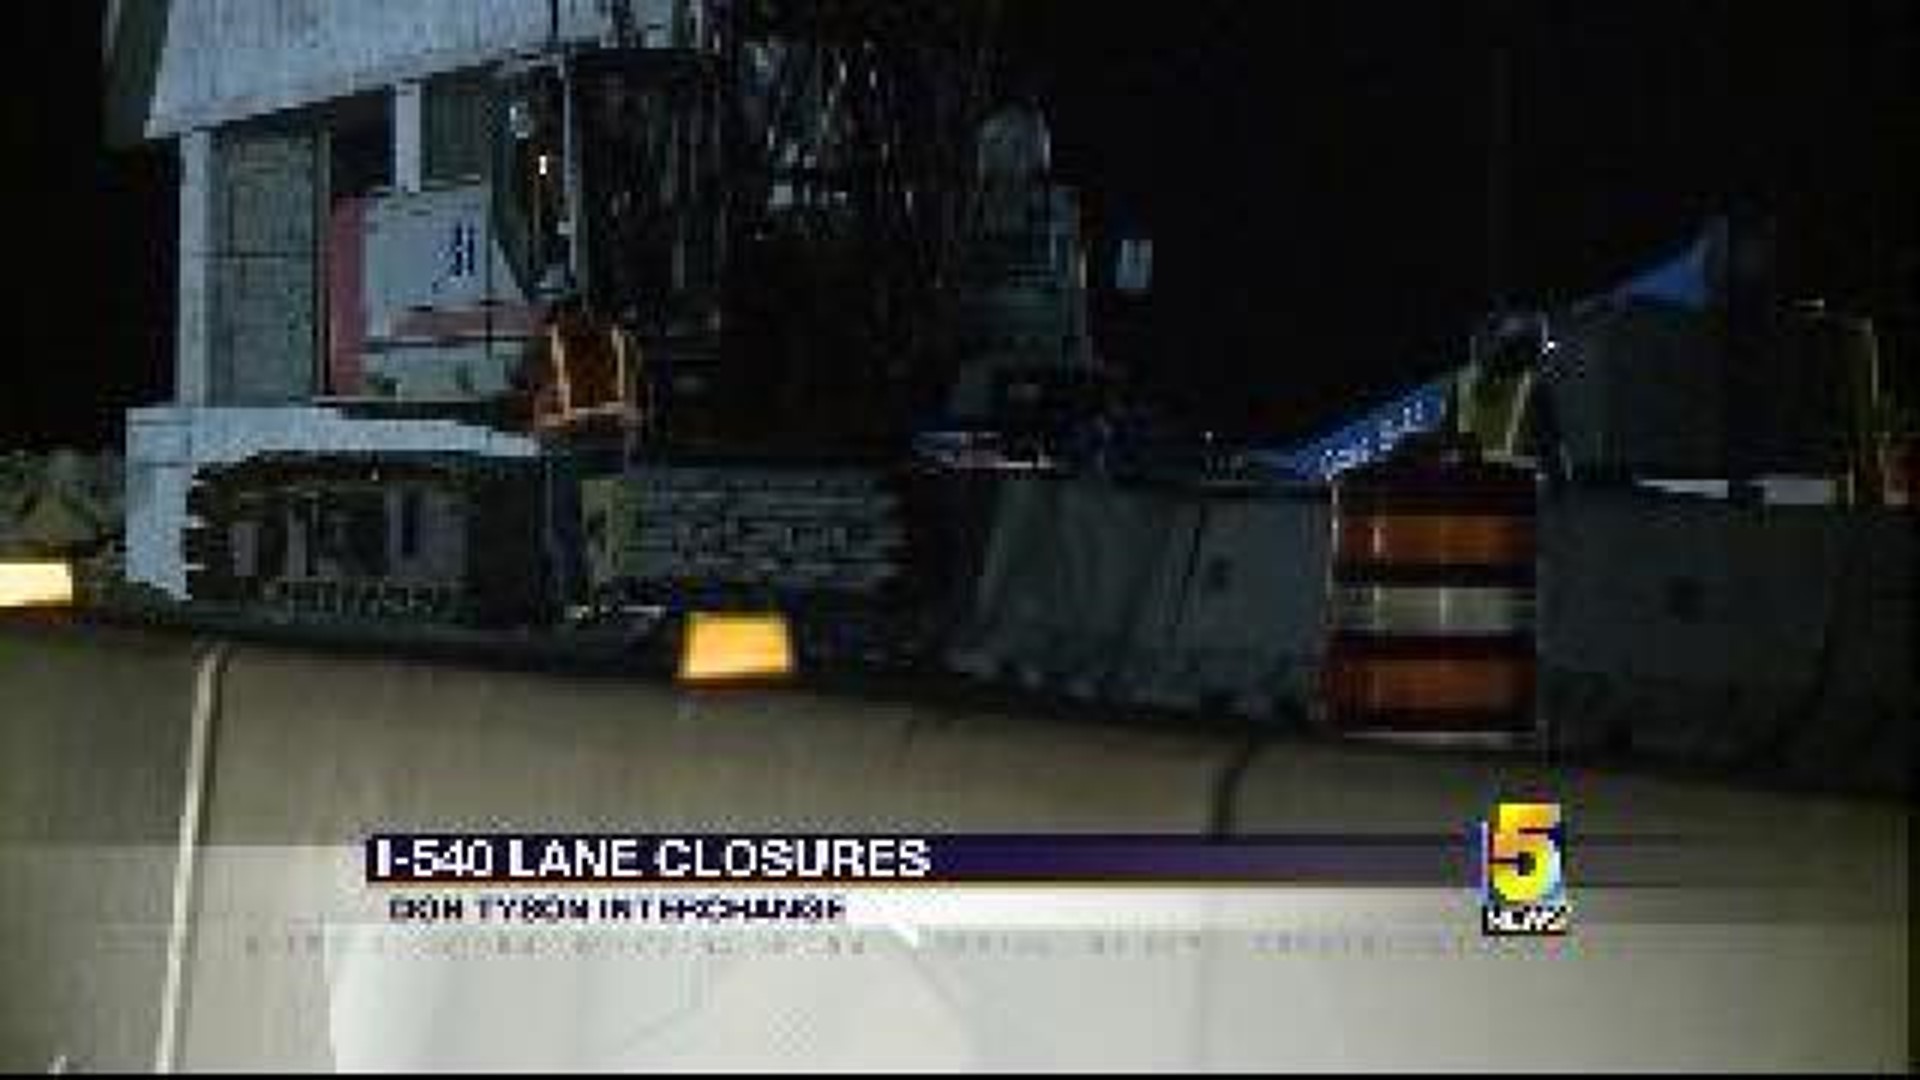 Section of I-540 Reduced To One Lane